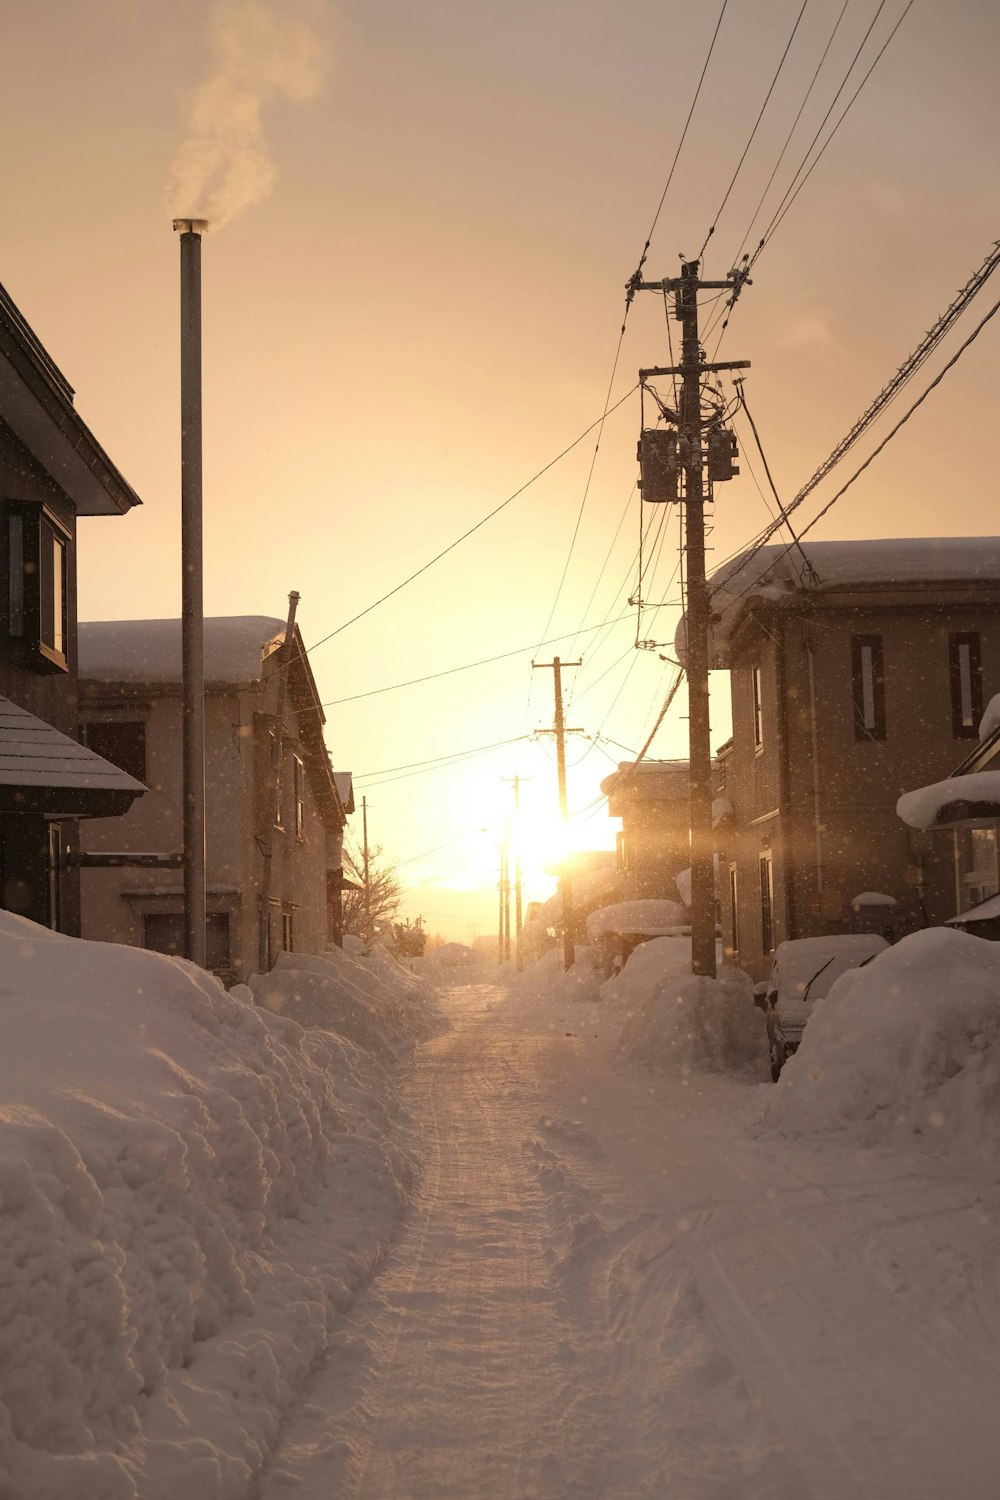 the sun is setting over a snowy street